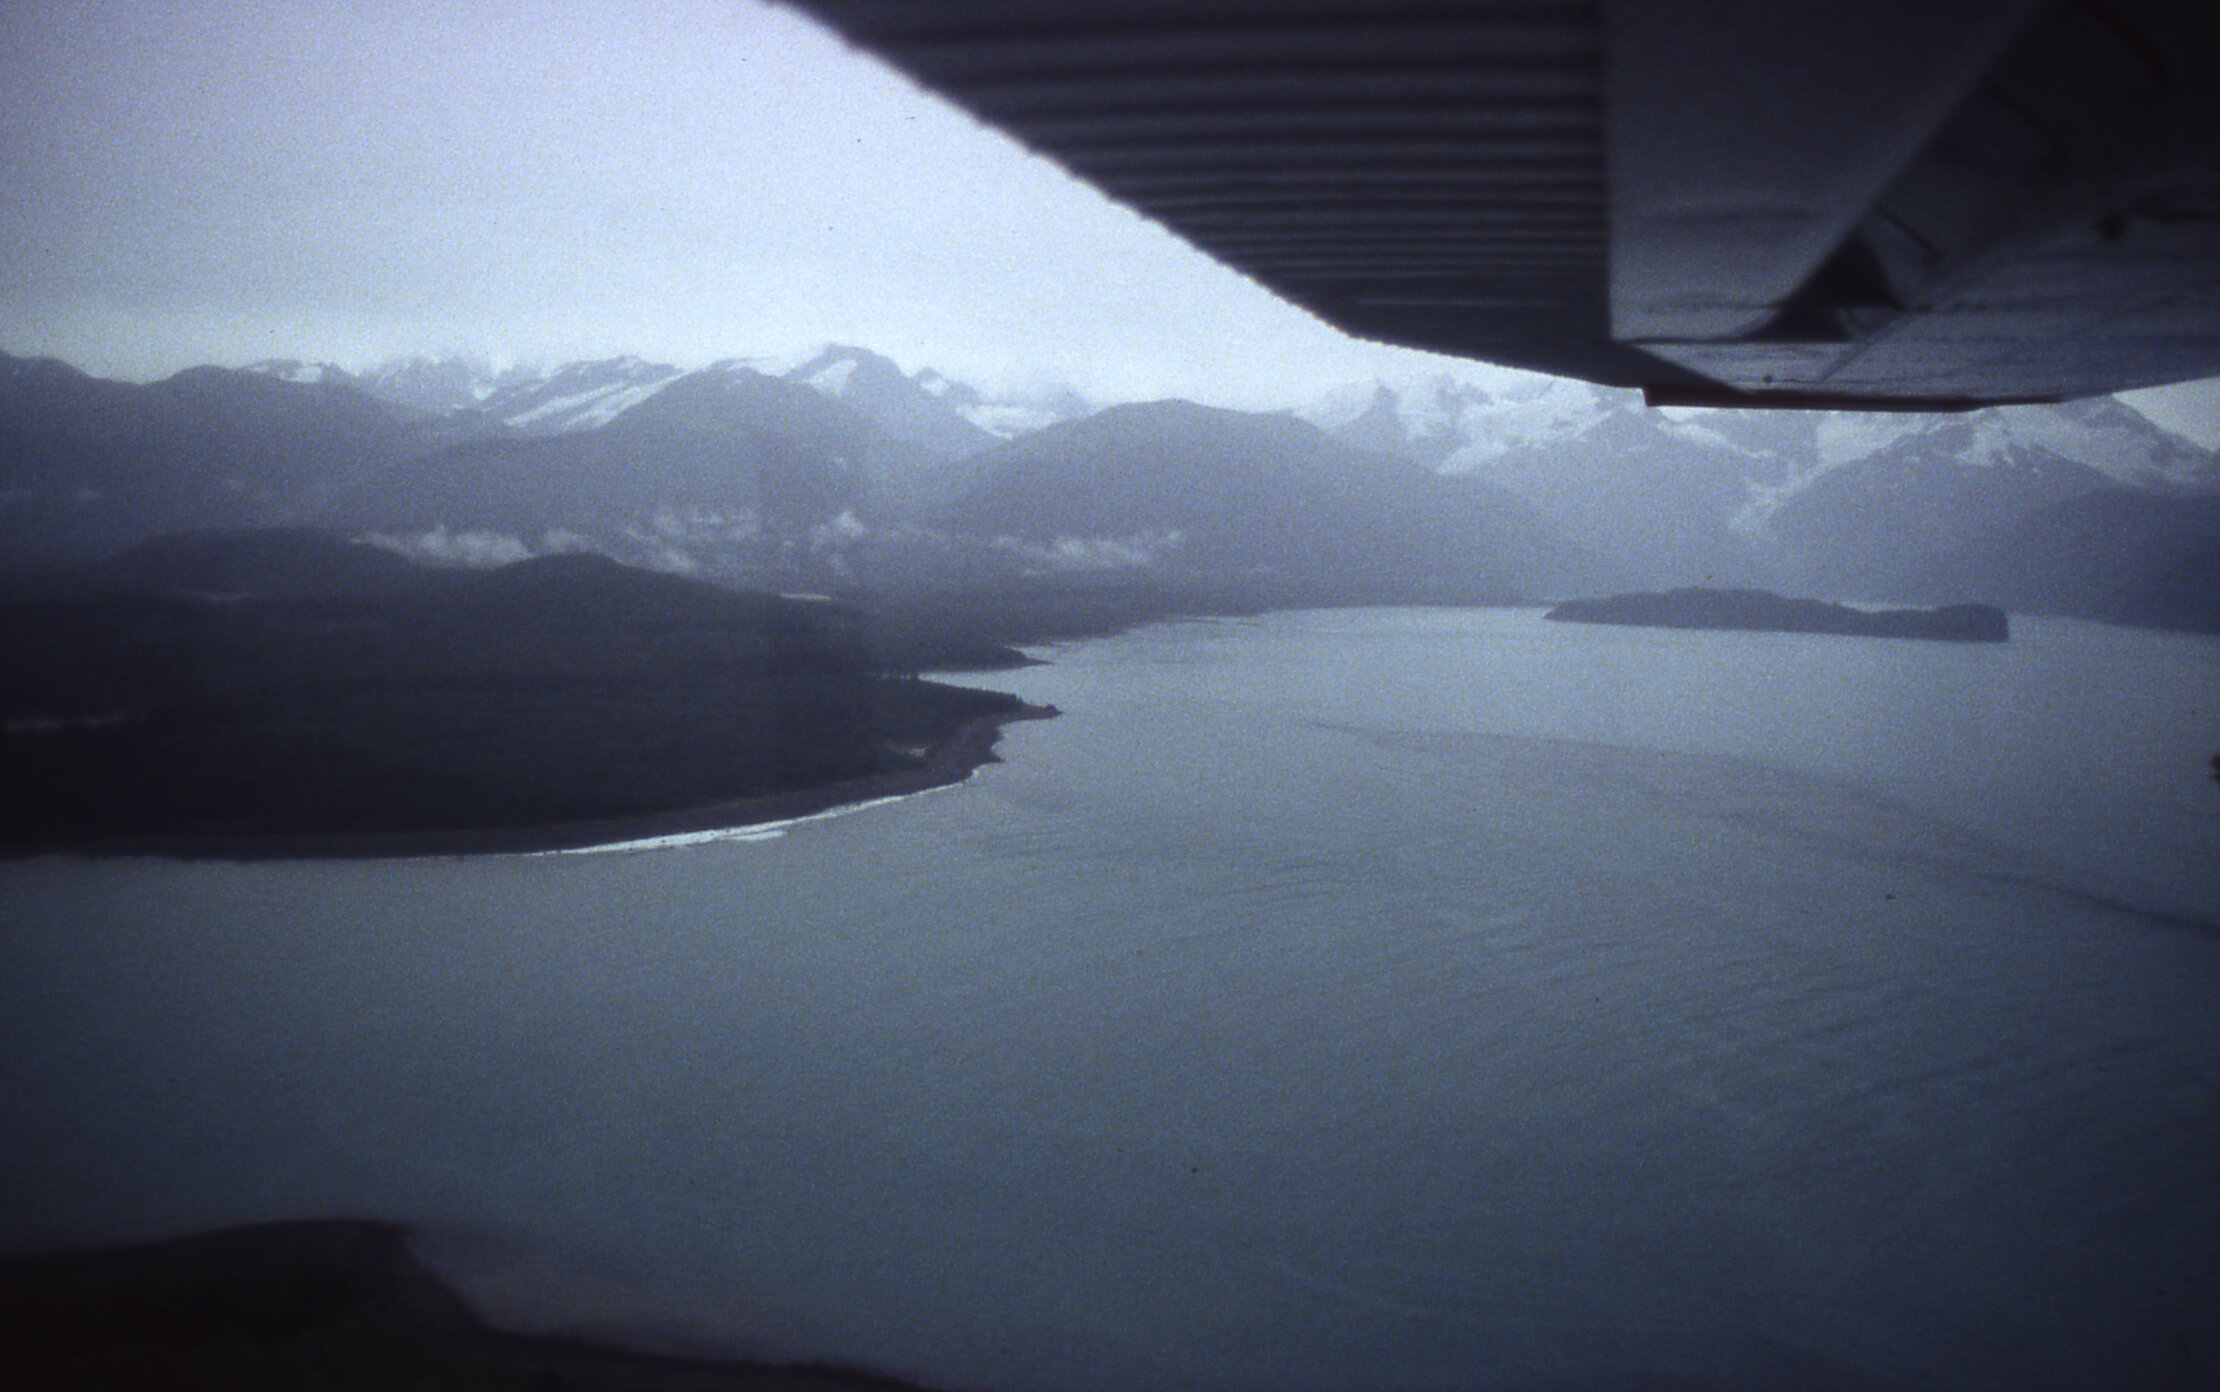  Looking for a place to land after a one hour flight from Yakutat Alaska, our bush pilot scans the beaches of Lituya Bay.  